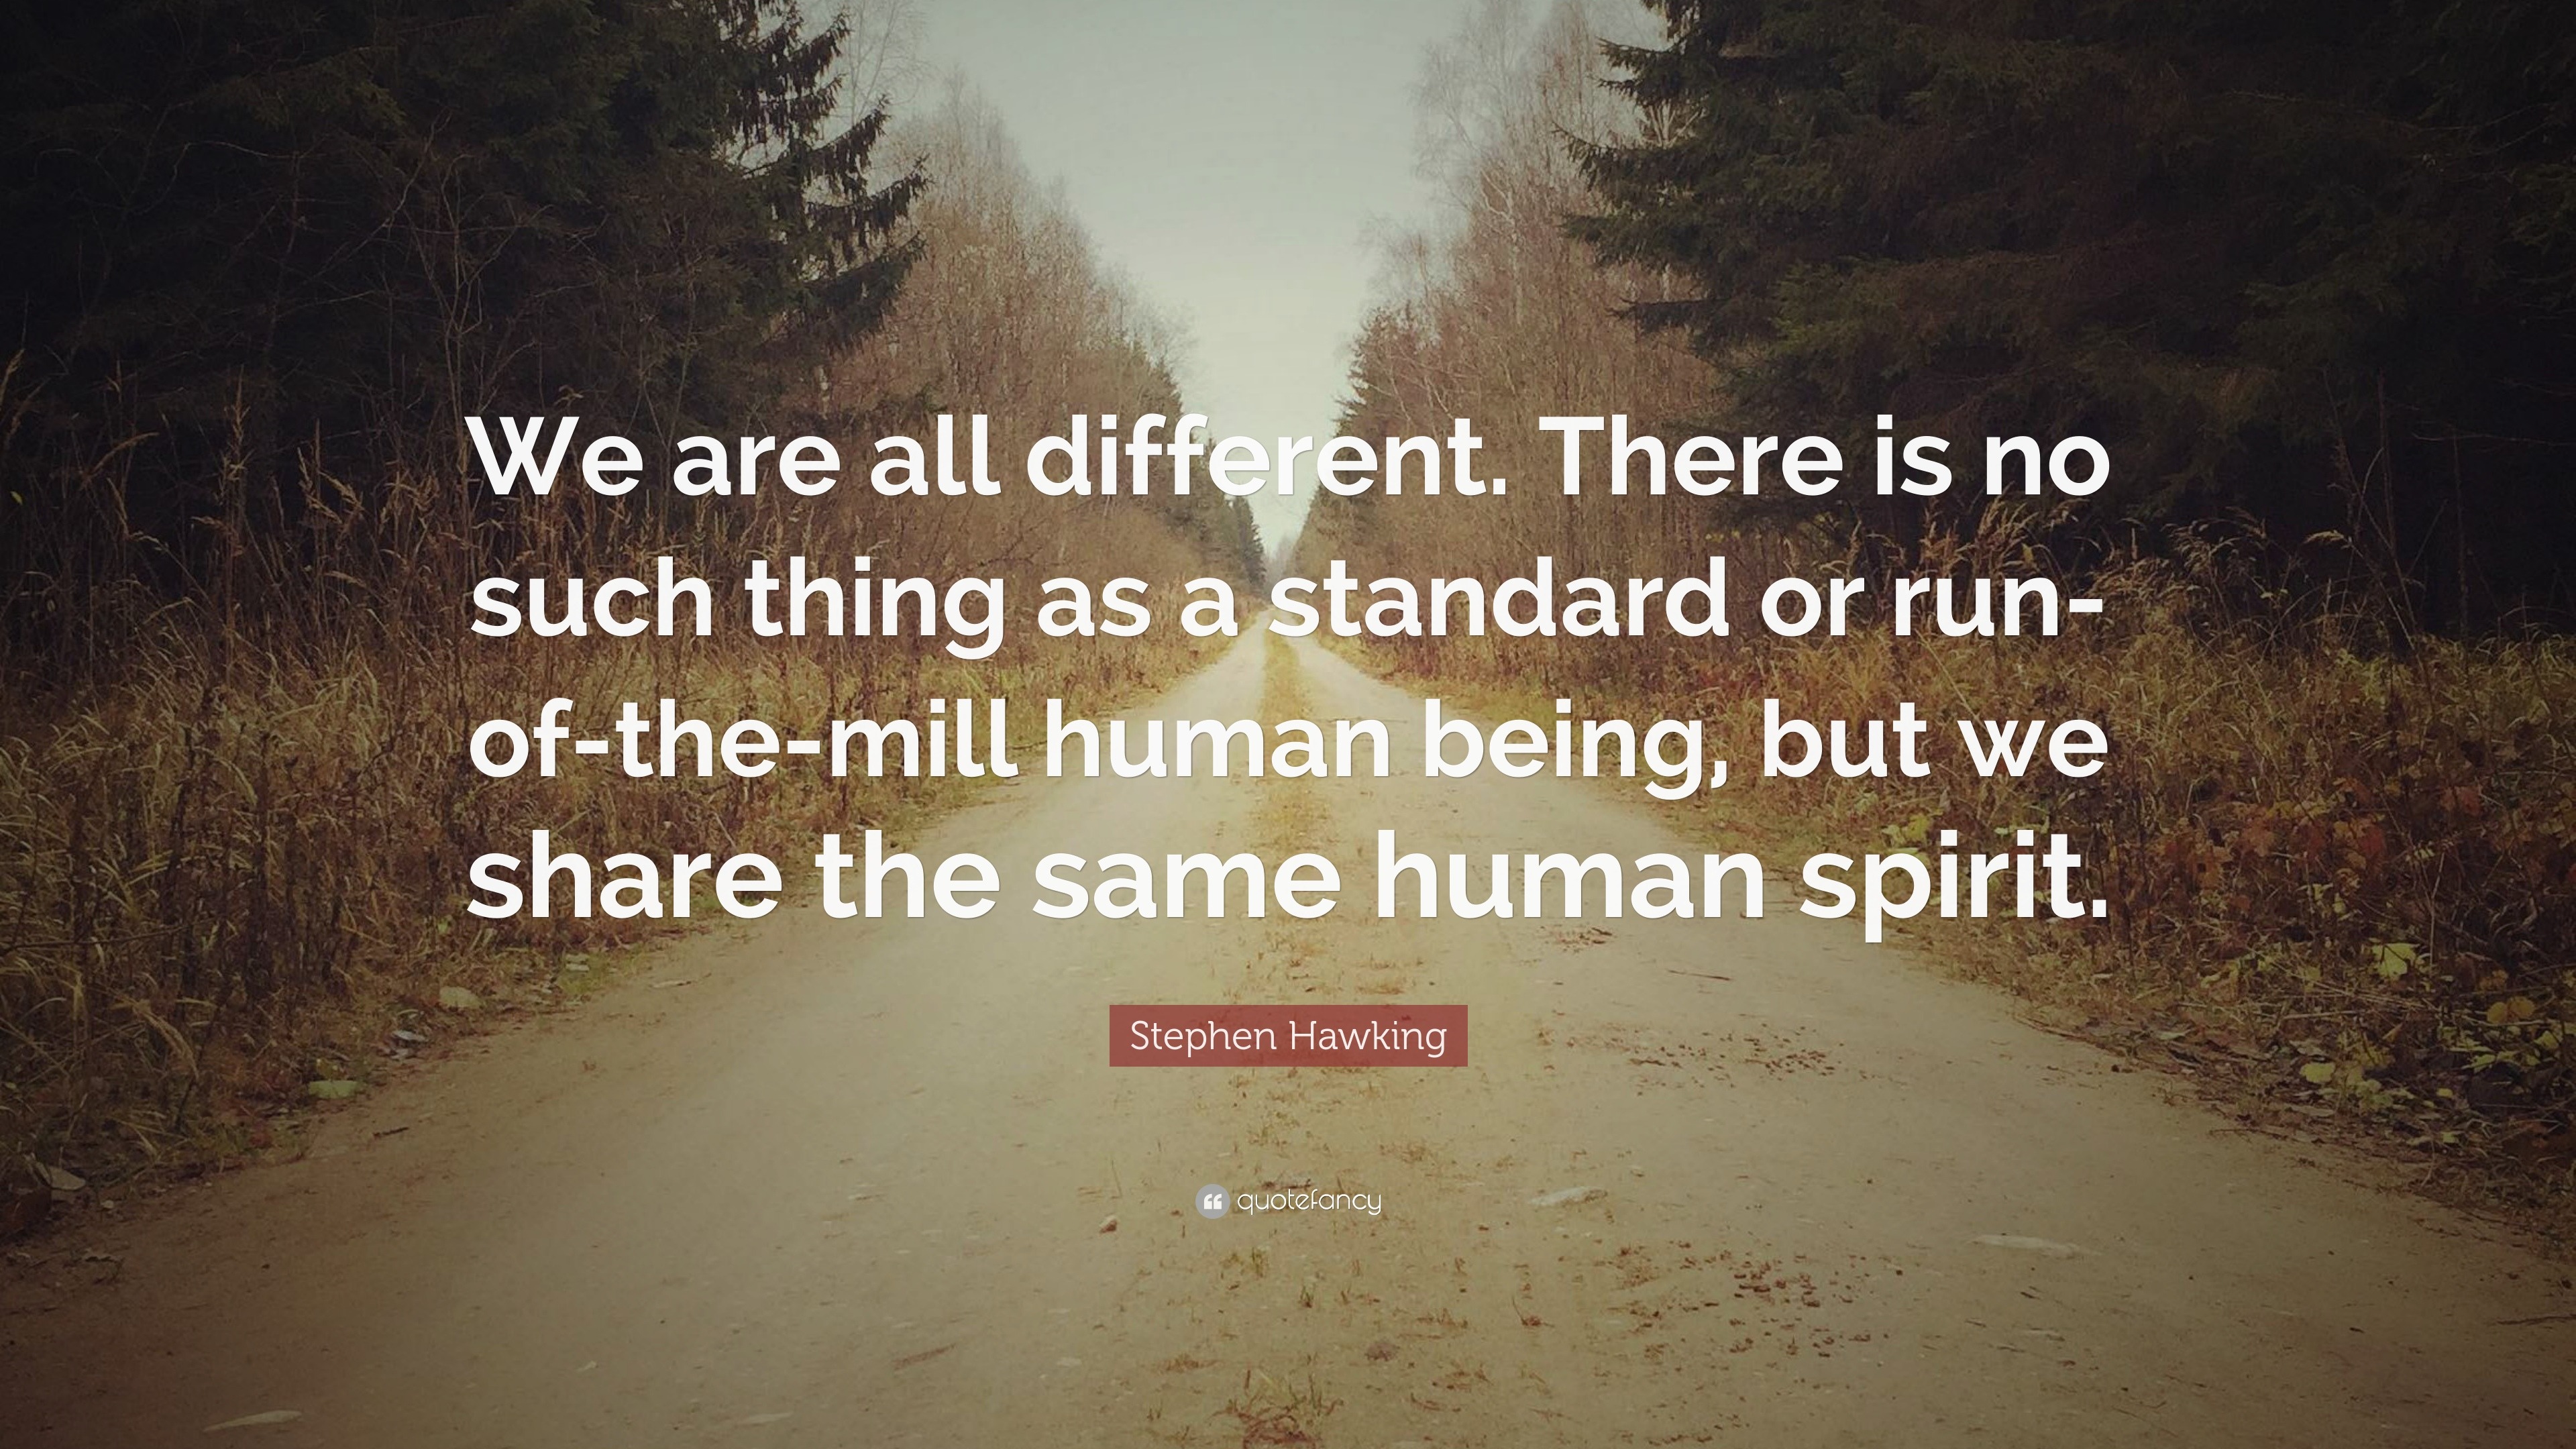 Stephen Hawking Quote: “We are all different. There is no such thing as